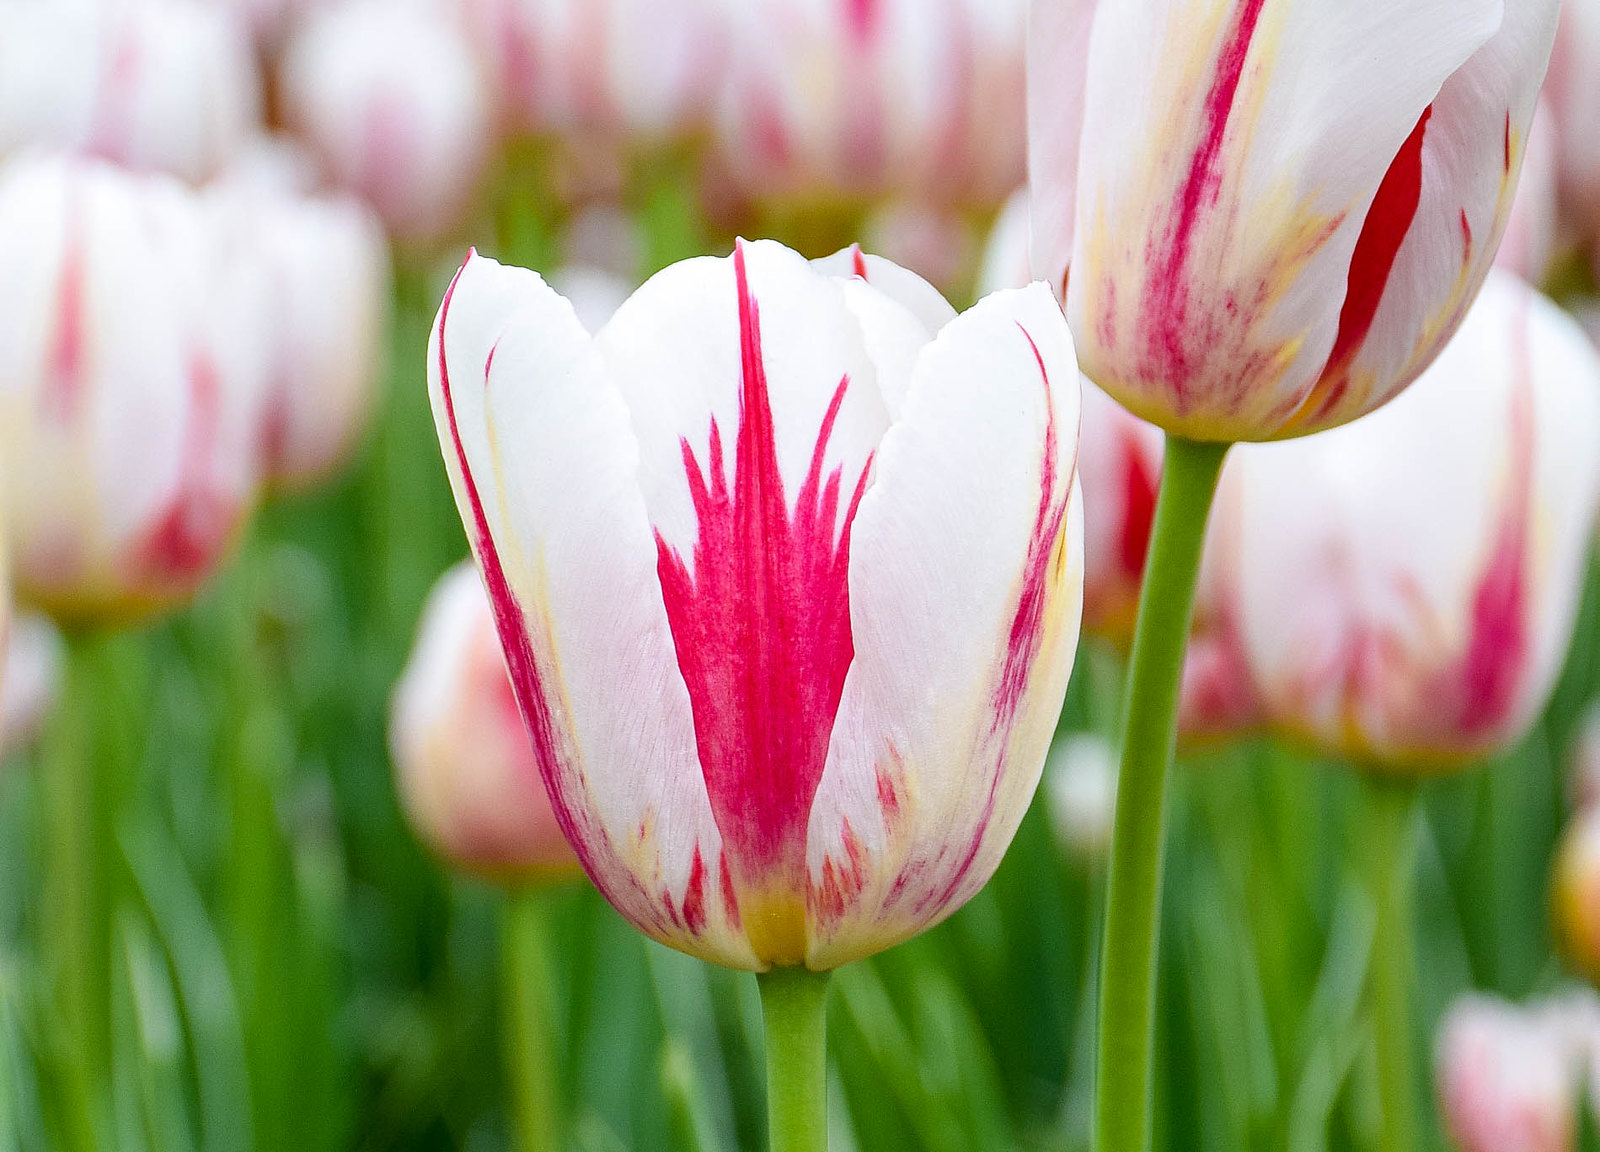 Tulips with a red maple leaf pattern at the Canadian Tulip Festival in Ottawa